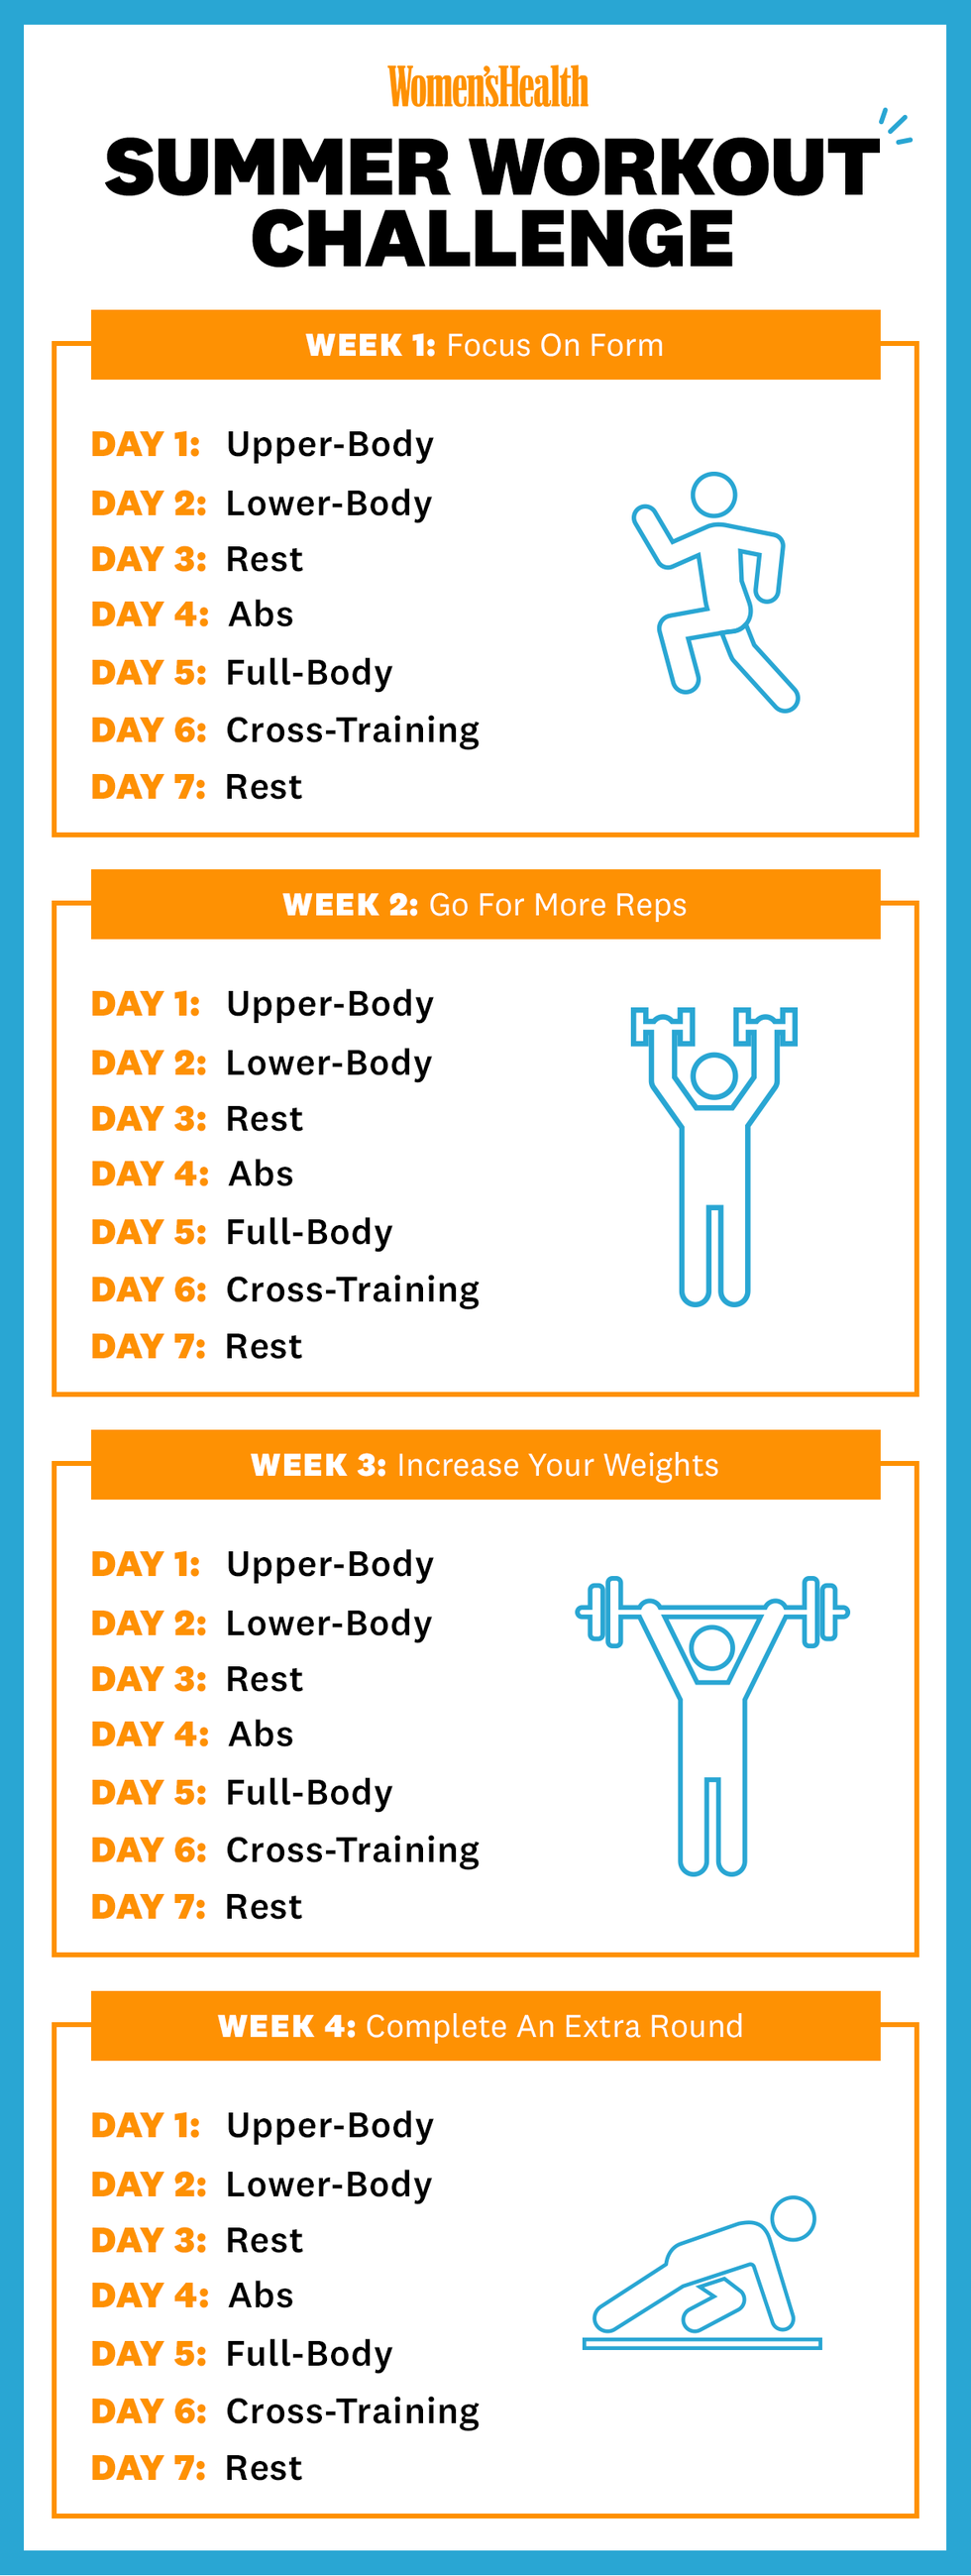 Summer Workout - Your 4-Week Summer Workout Plan To At Home